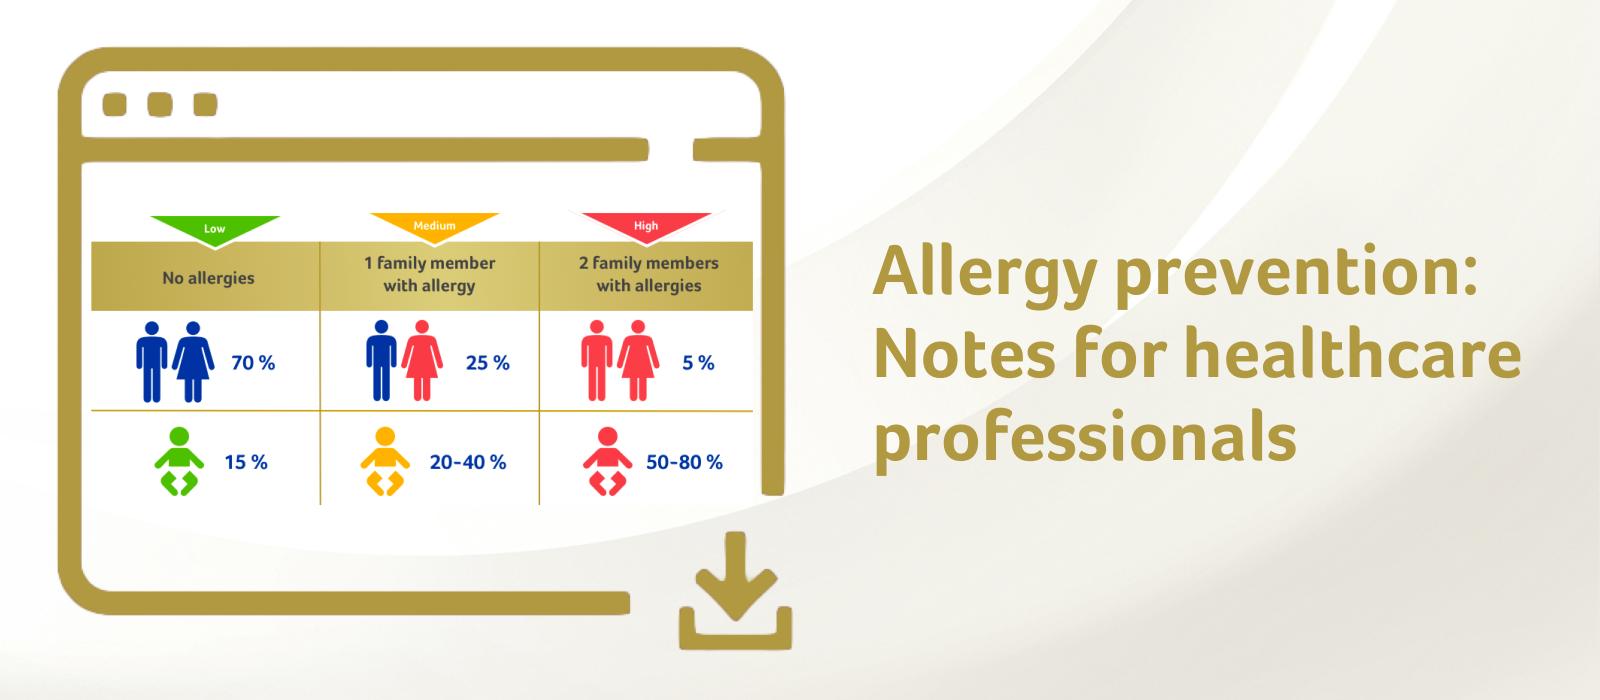 Allergy prevention: Notes for HCPs - Banner